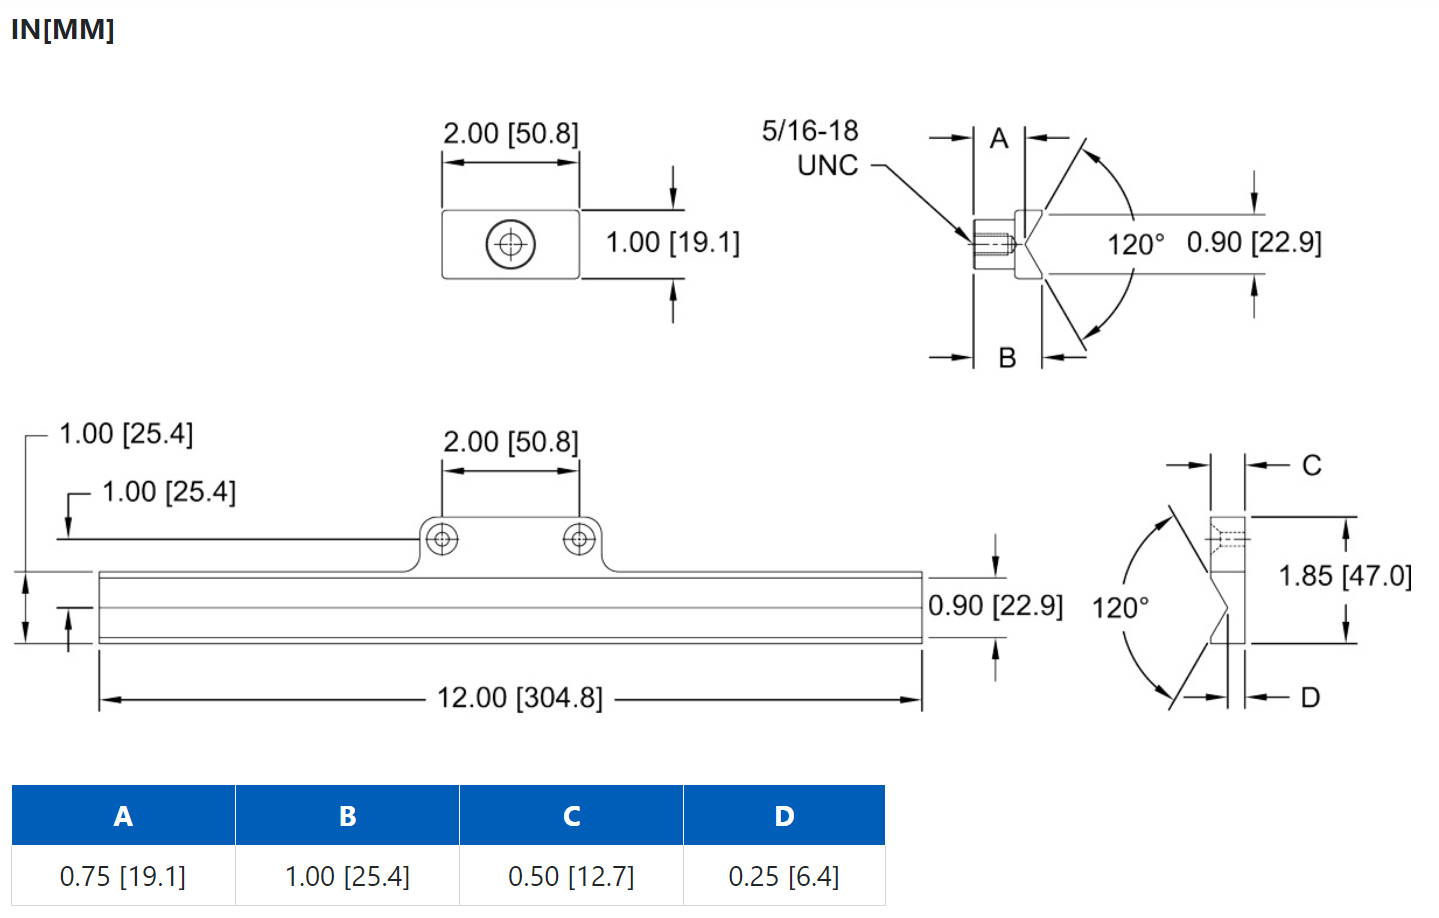 Mark-10 G1072 Opening Force Fixture Set dimensions.